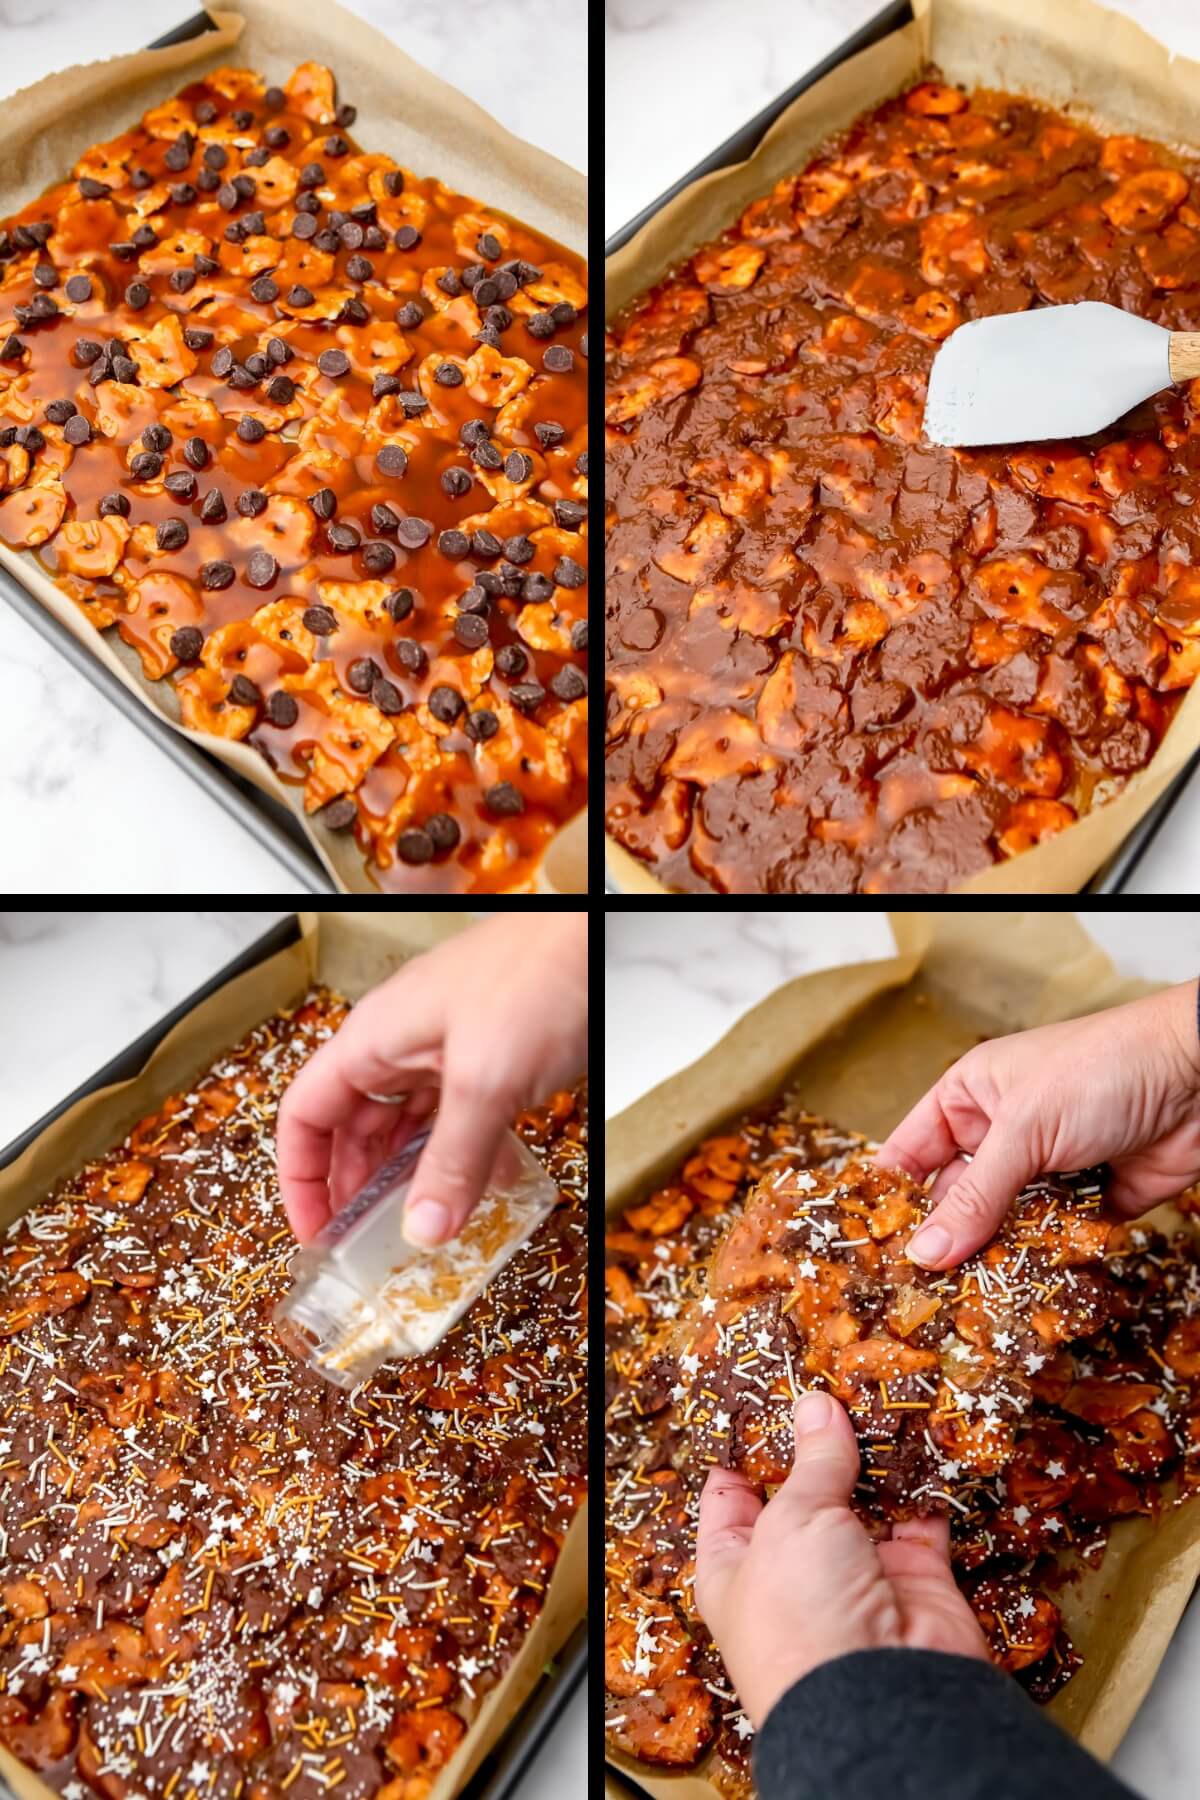 A collage of 4 images showing the process steps of melting chocolate over vegan Christmas crack and adding sprinkles to the top.